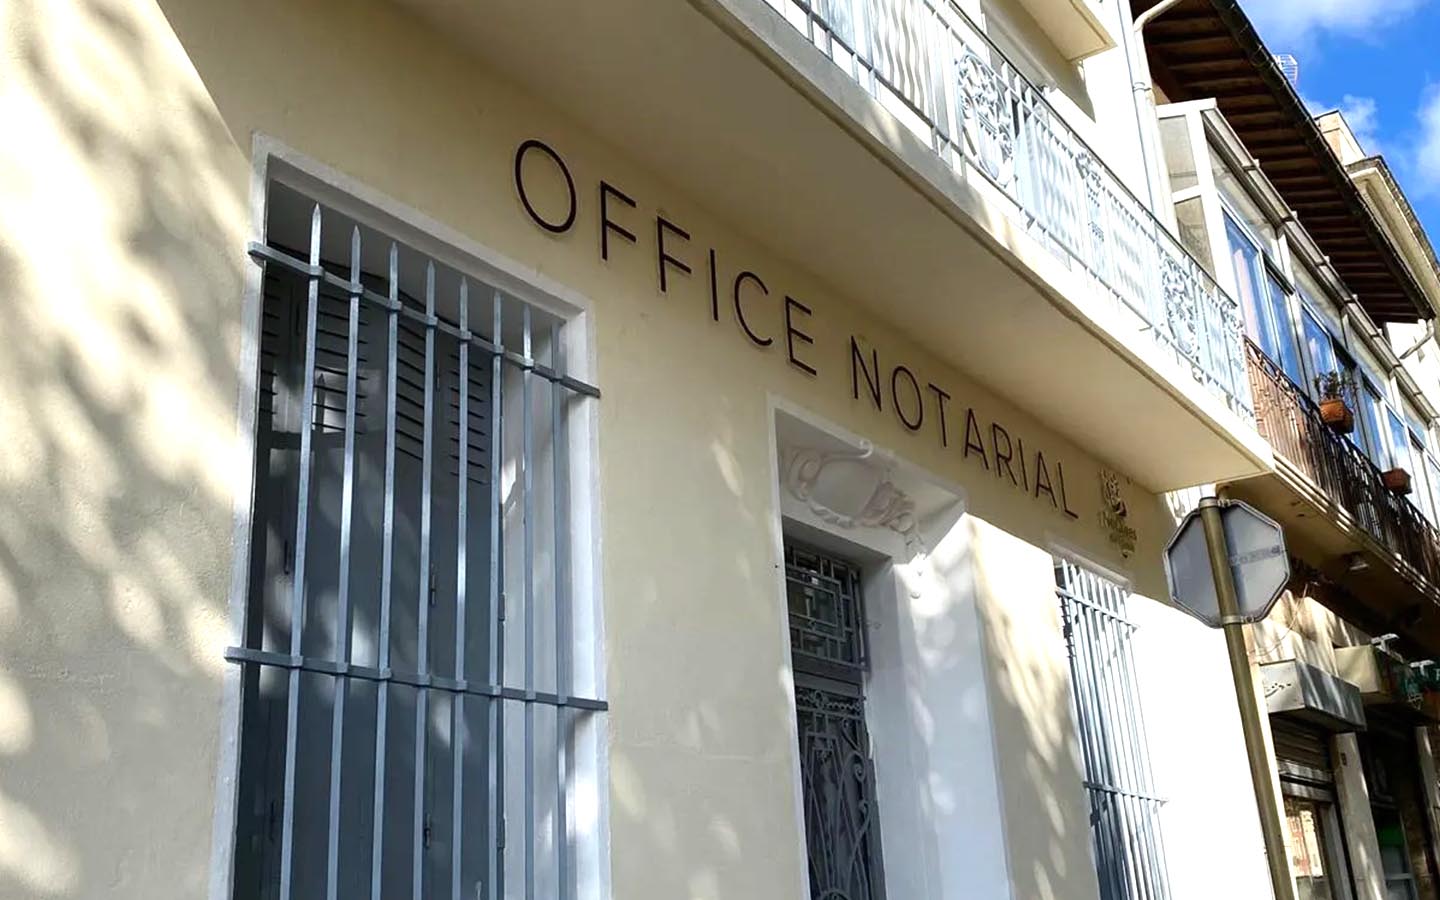 Enseigne Office Notarial